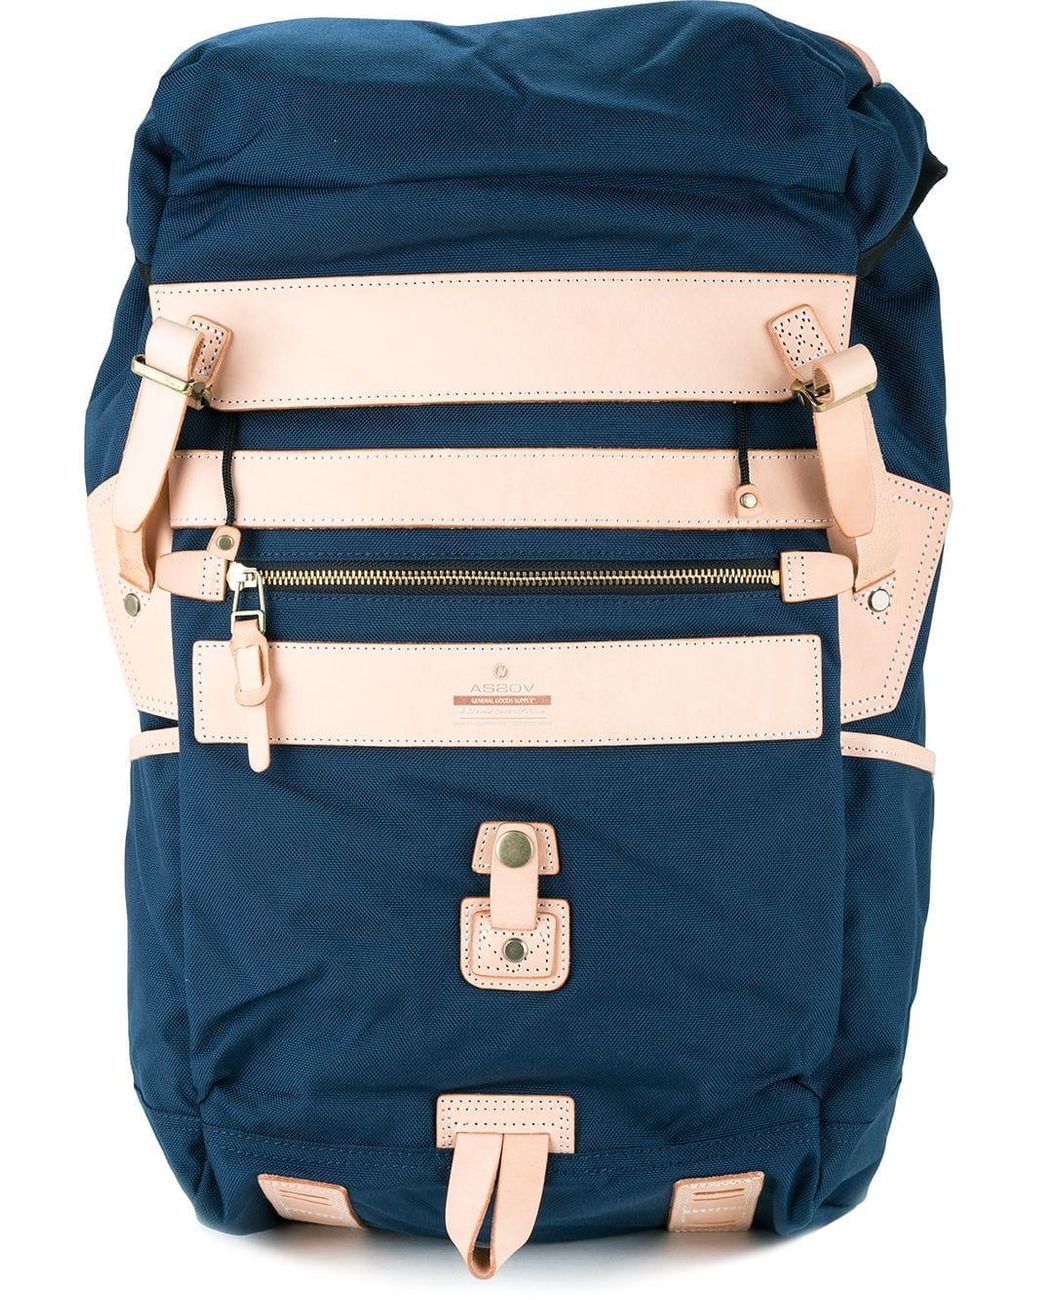 AS2OV Synthetic Oversized Backpack in Blue for Men - Lyst